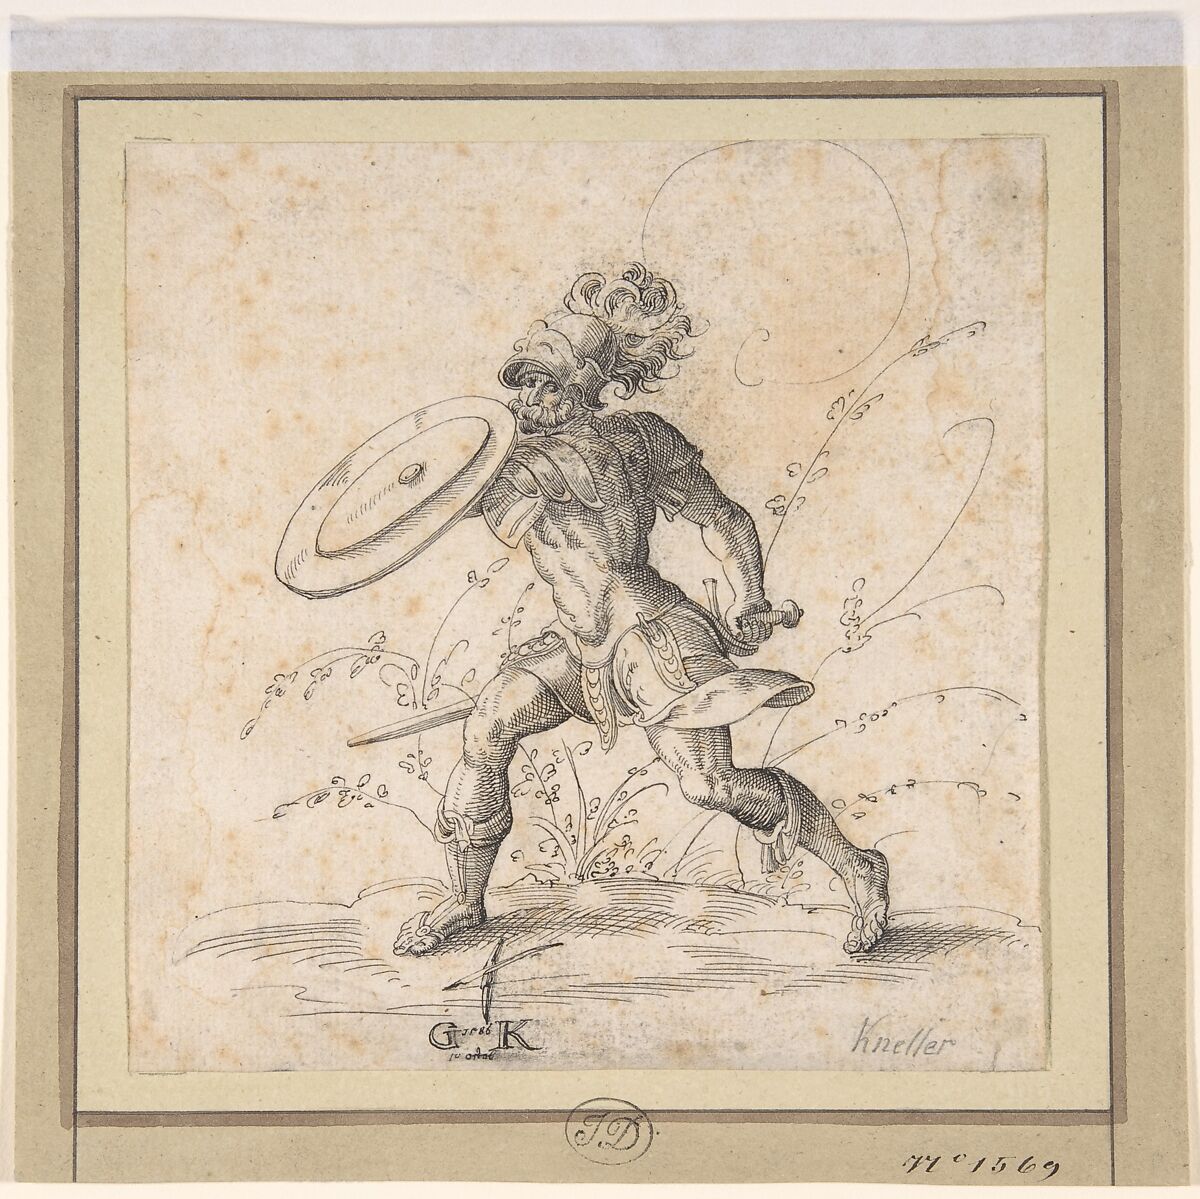 A Soldier Brandishing a Shield in a Landscape, Monogrammist GK (German, late 16th century), Pen and black ink 